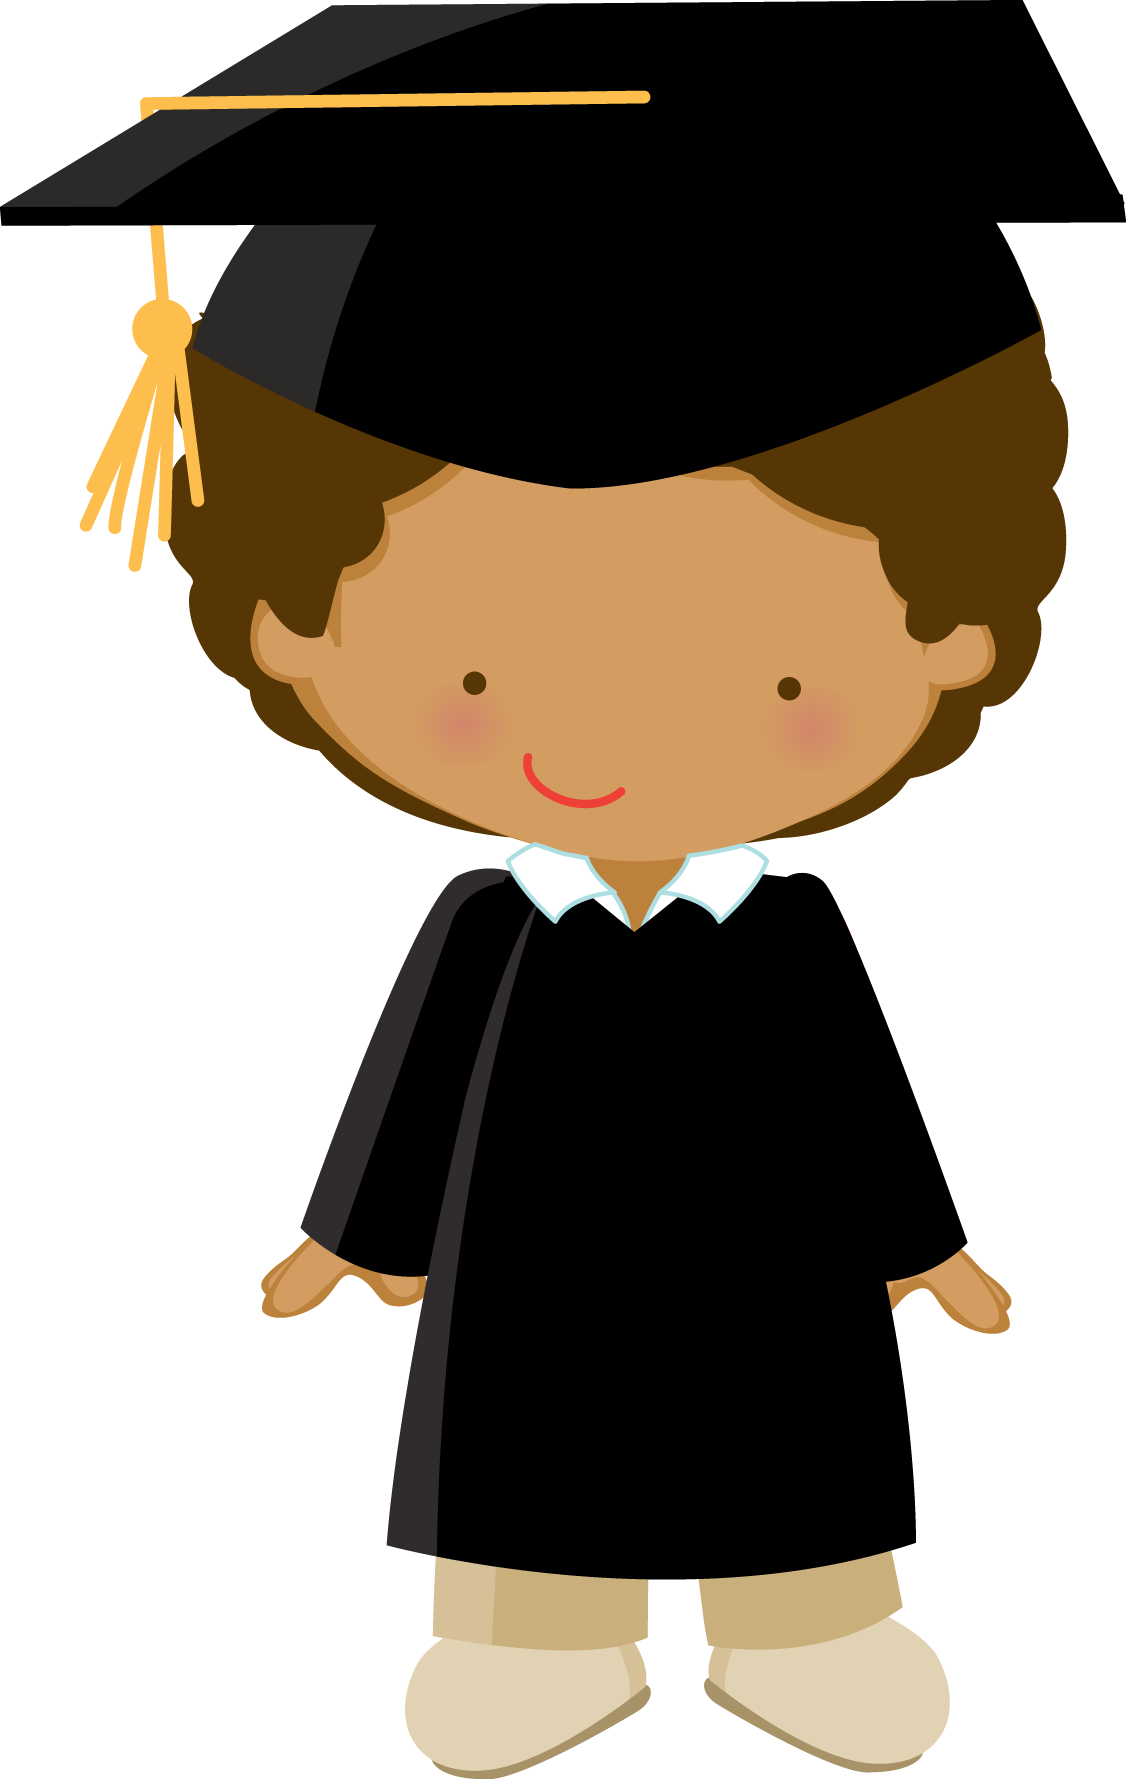 A Cartoon Of A Boy Wearing A Graduation Cap And Gown